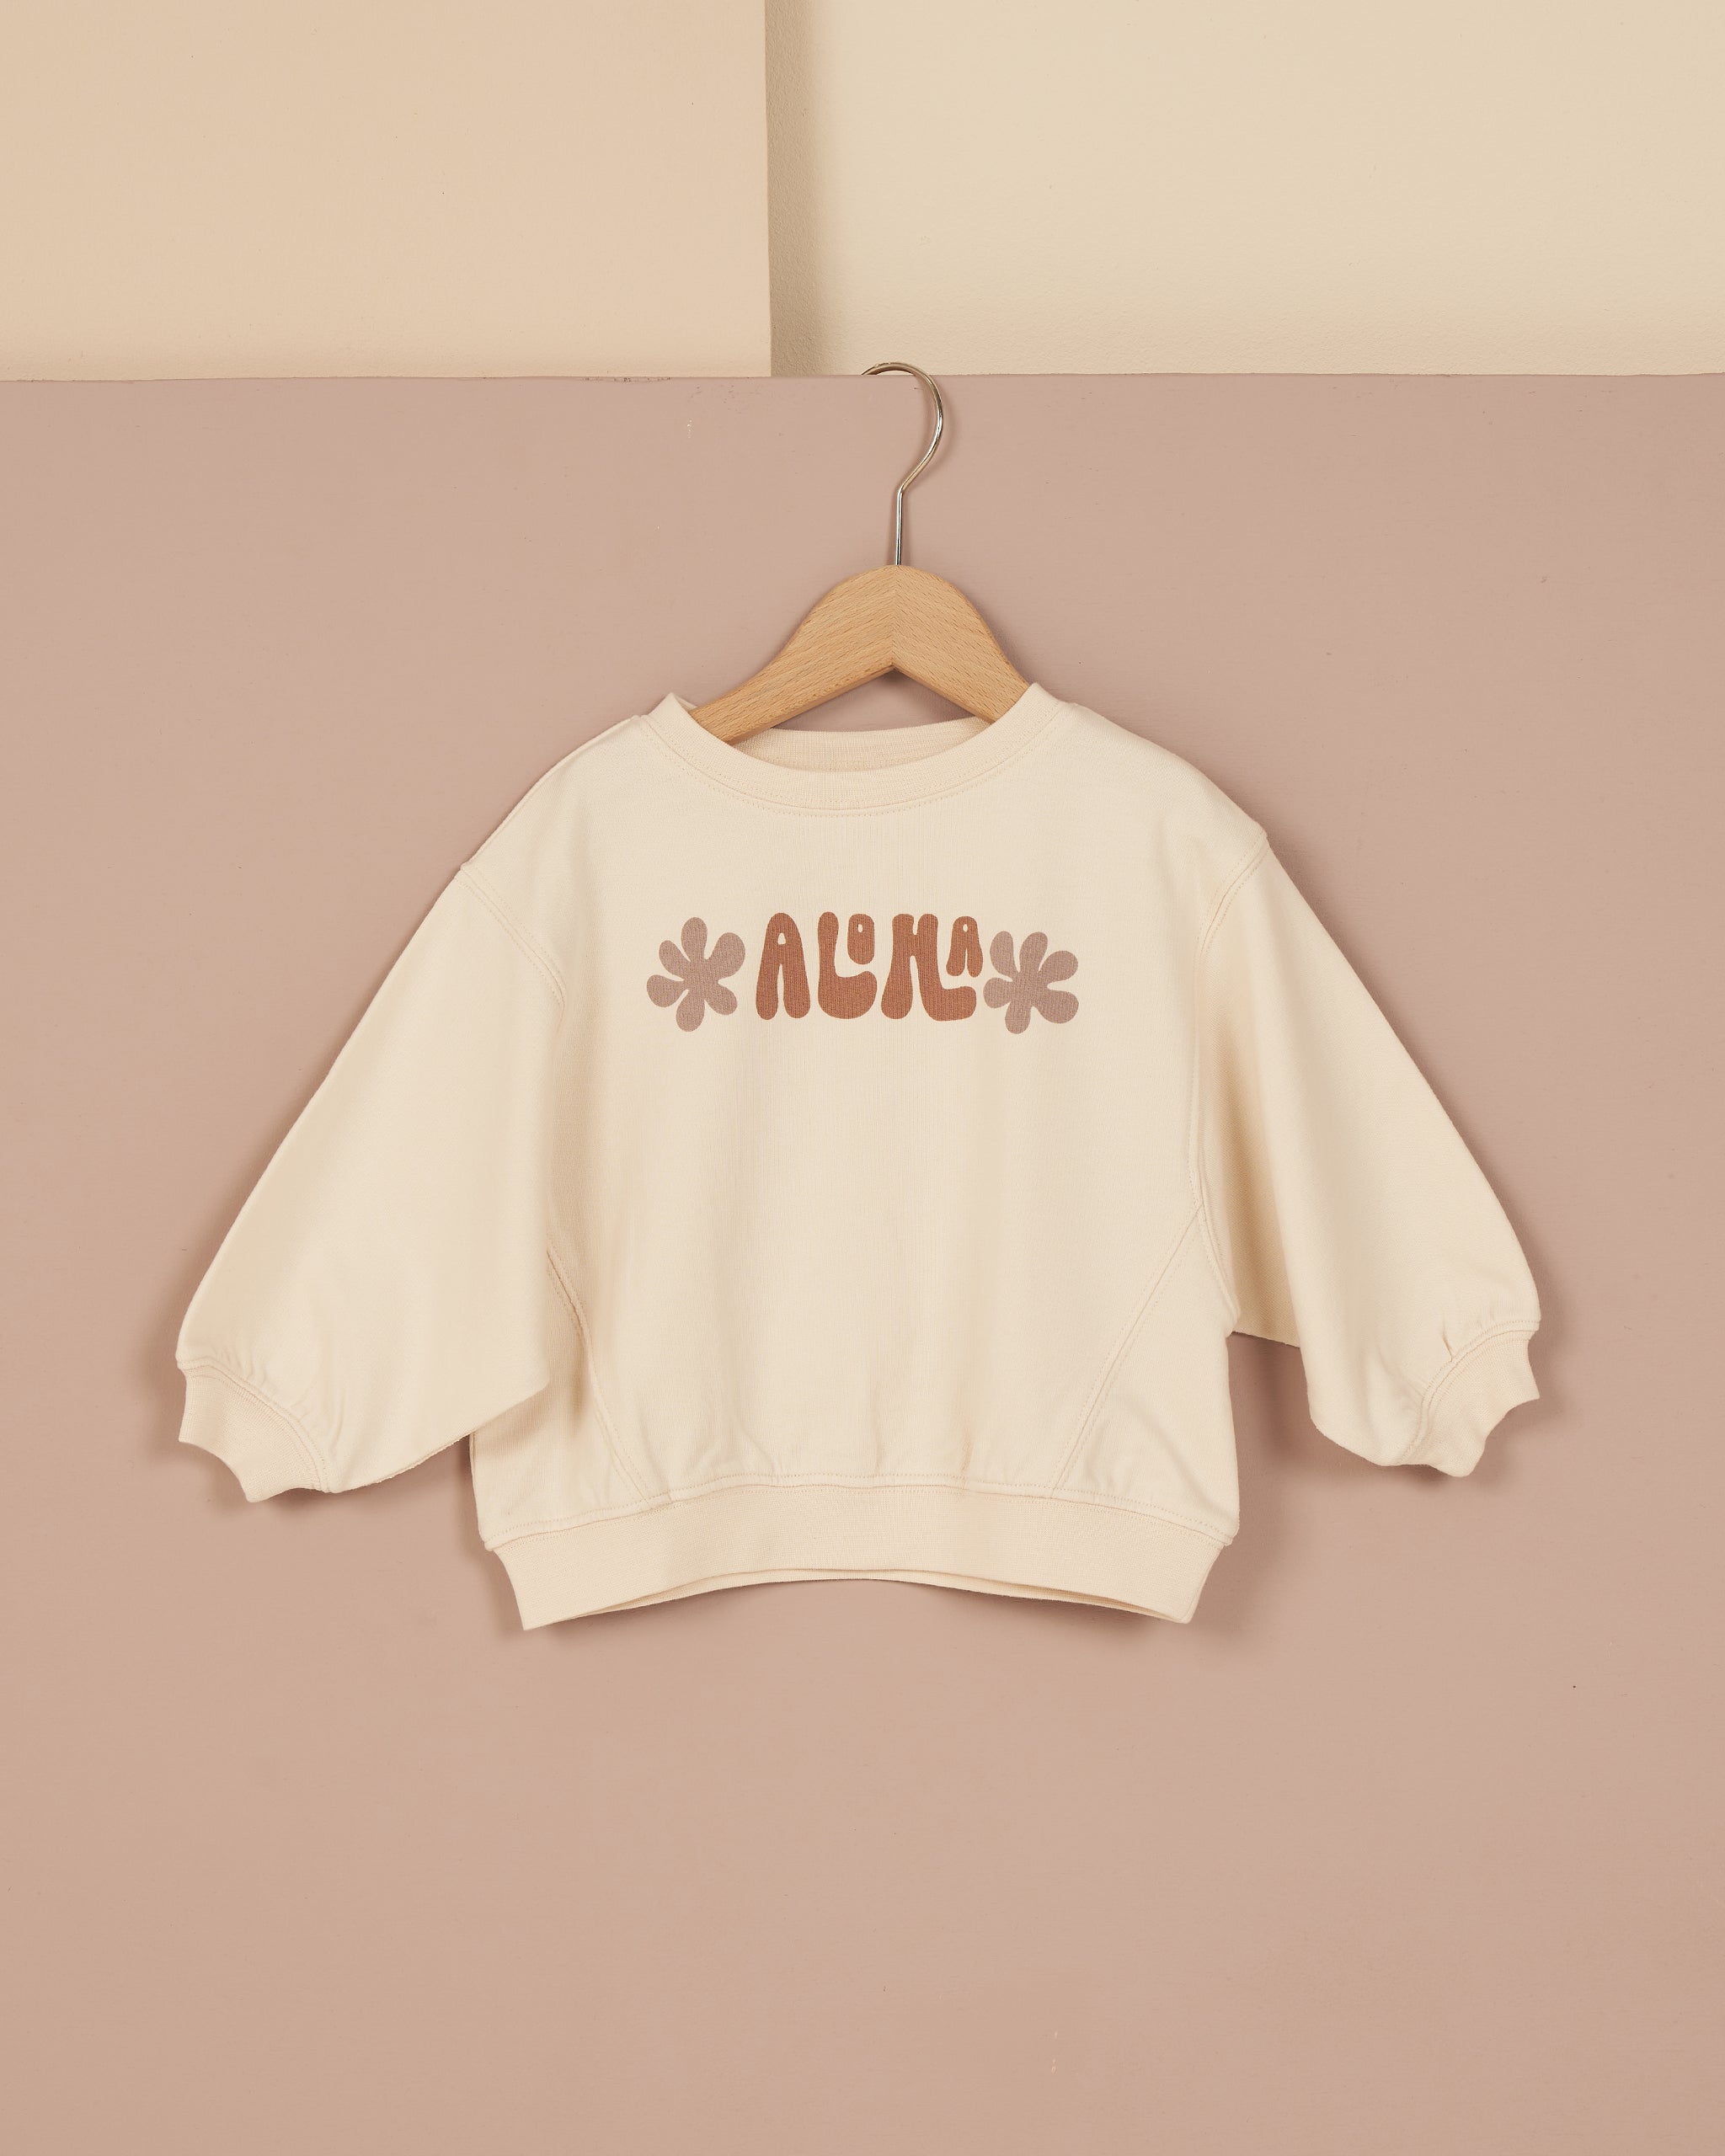 Oversized Sweatshirt || Aloha - Rylee + Cru | Kids Clothes | Trendy Baby Clothes | Modern Infant Outfits |